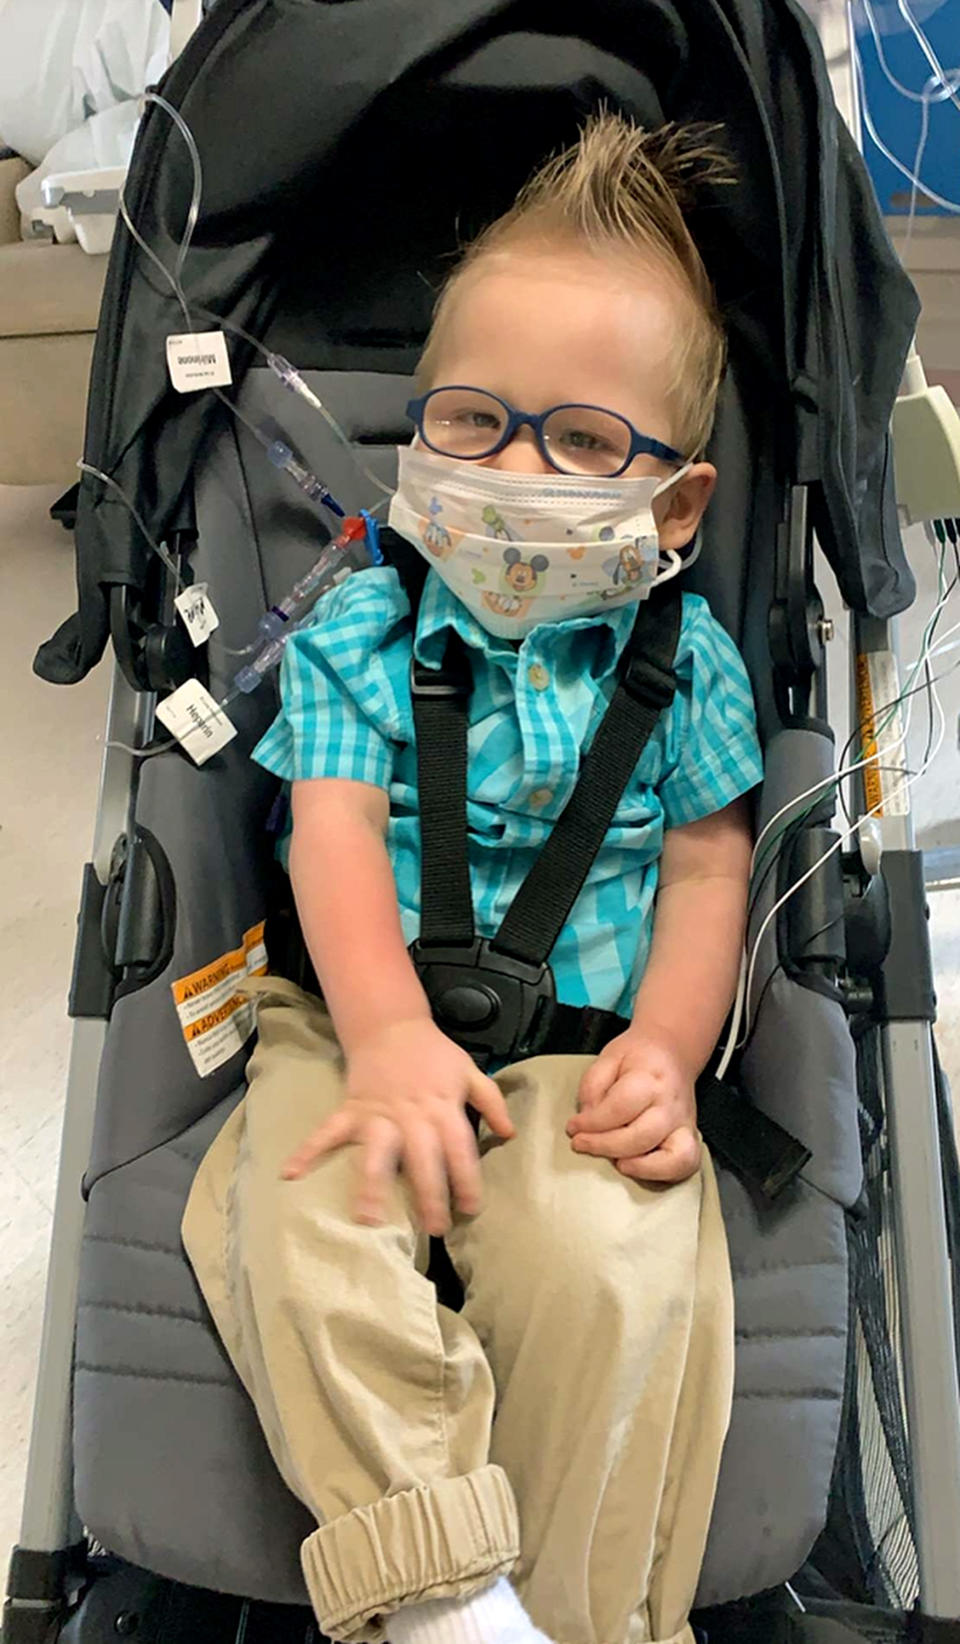 In this photo provided by Reeanne Parisien her son, Greyson, sits in a stroller at the Mayo Clinic in Rochester, Minn., in May 2019. Greyson's journey to correct a heart defect led the Turtle Mountain Band of Chippewa Indians to designate a spot on tribal IDs for organ donation. (Reeanne Parisien via AP)